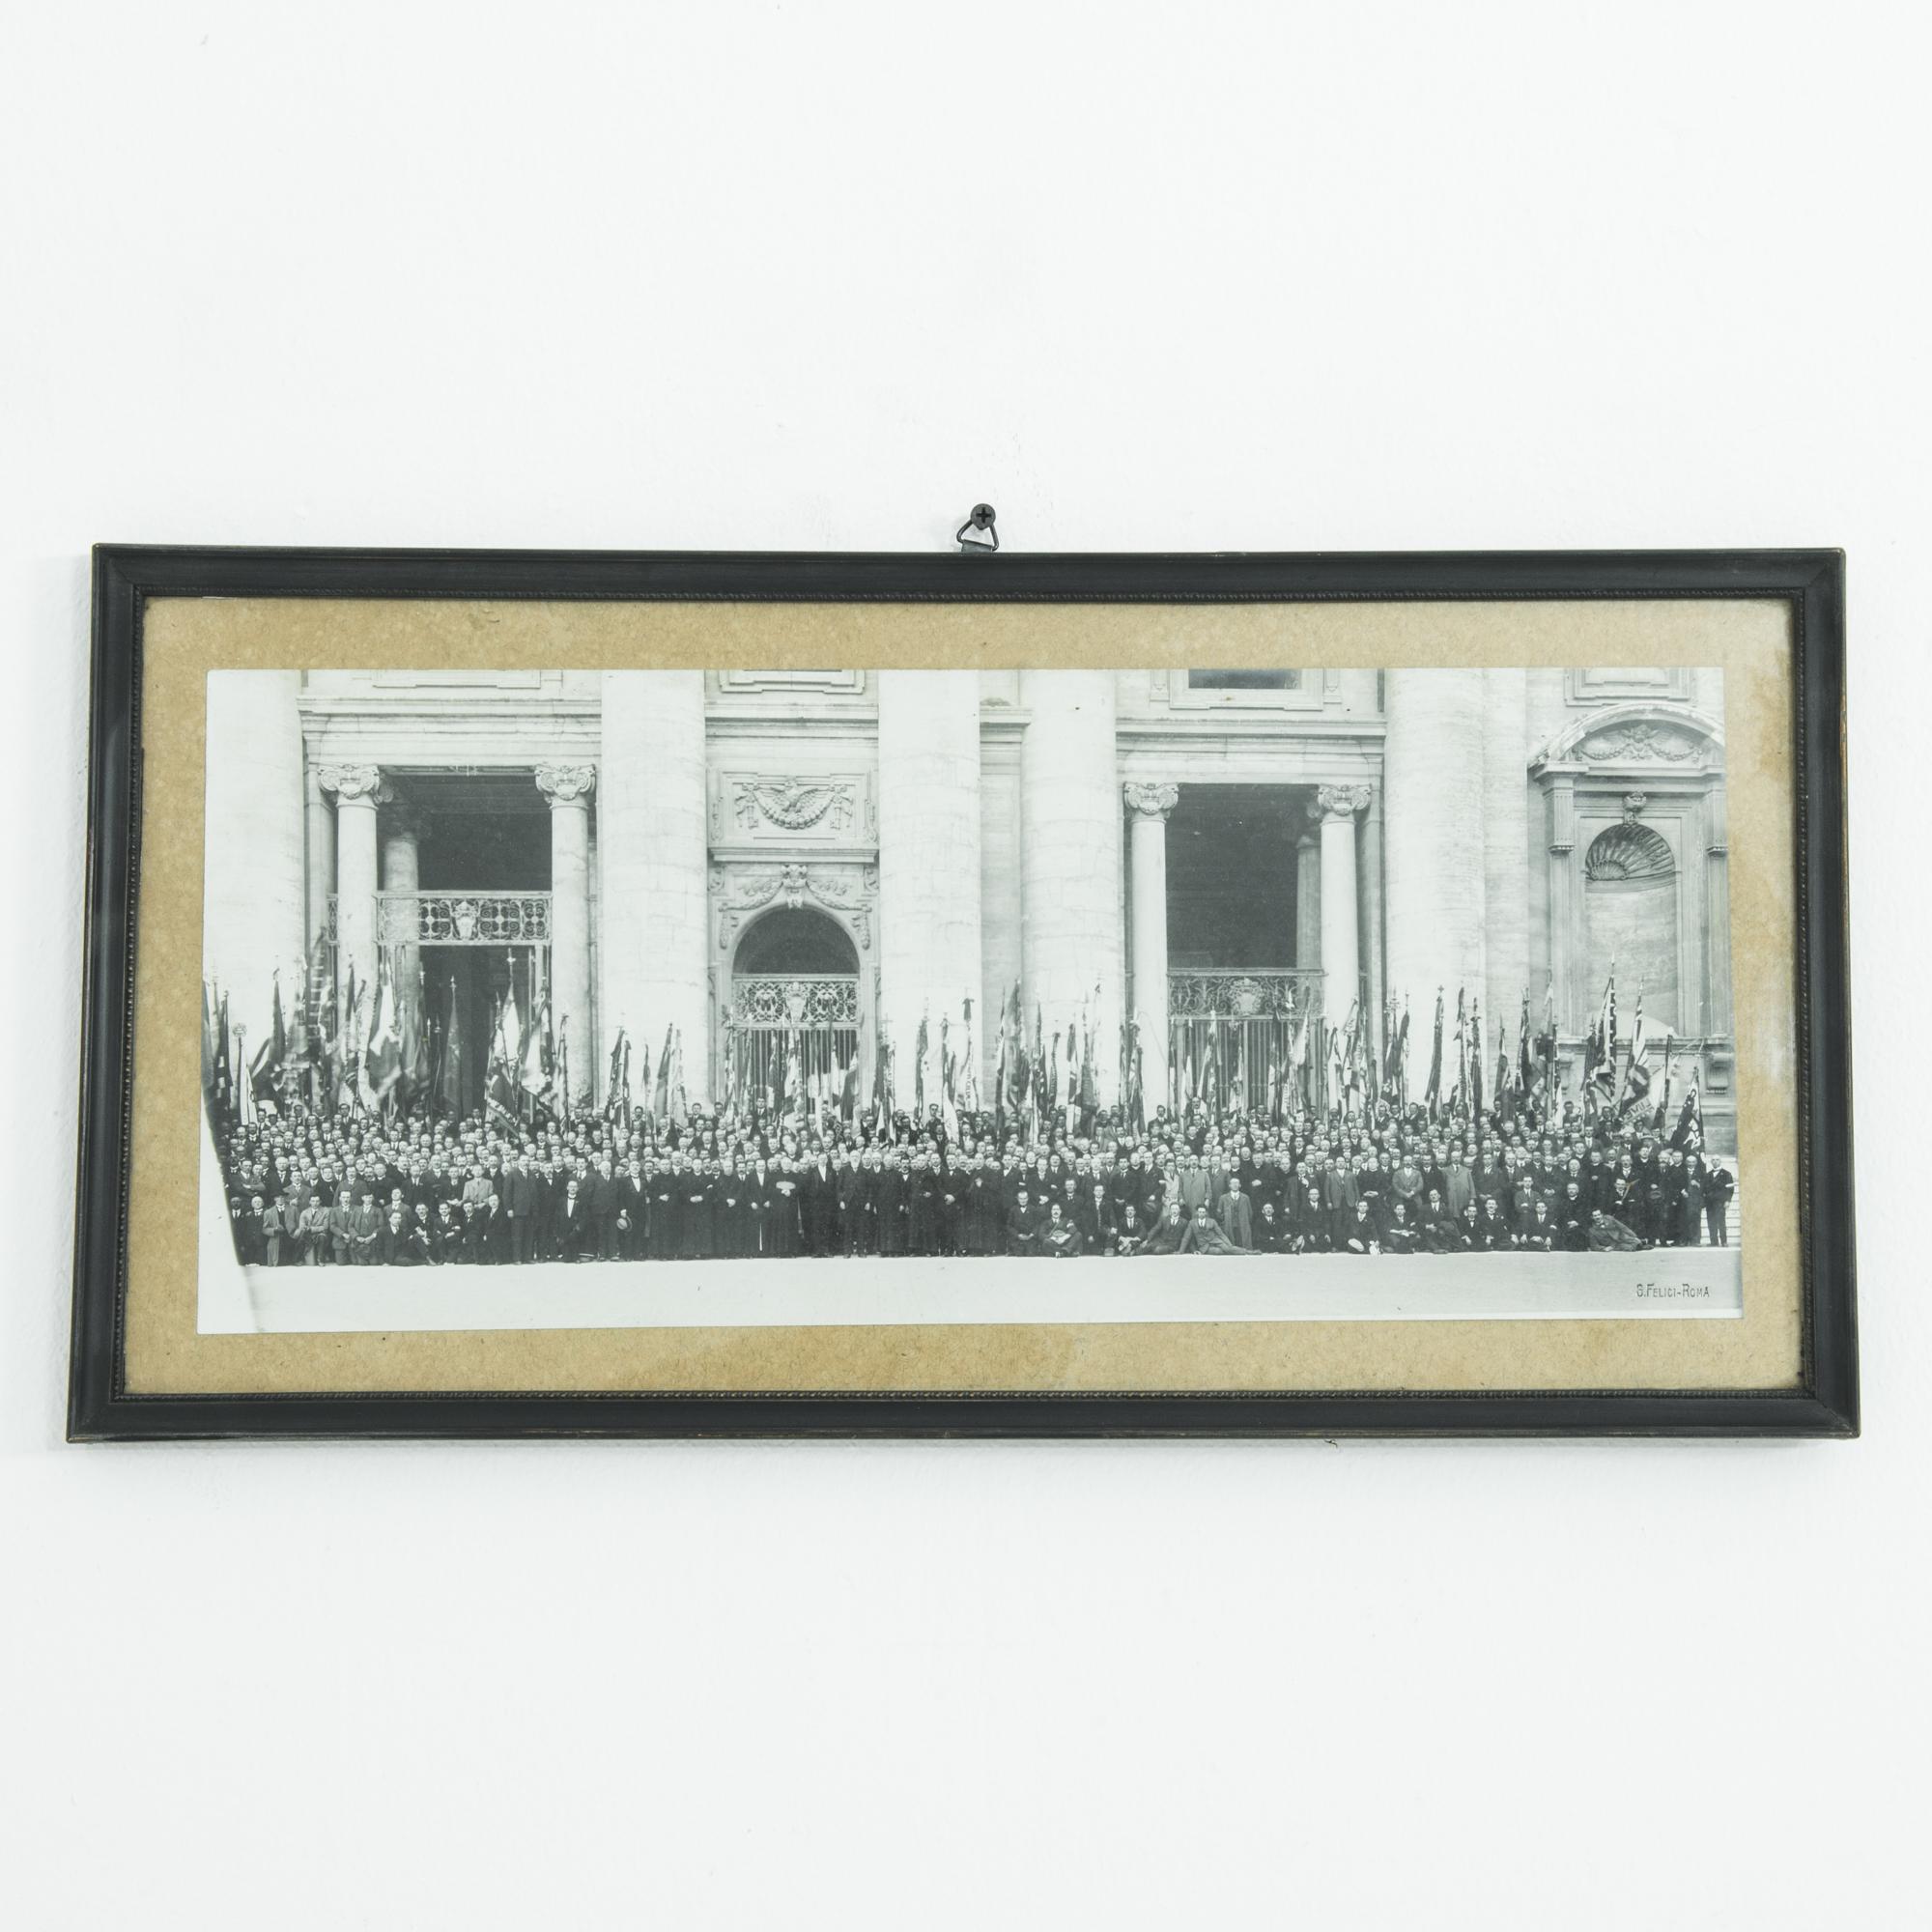 A black and white photograph in a wooden frame from 1940s Italy, depicting a parade or official gathering. The photograph would have been taken during the years of the Mussolini dictatorship — the deliberate framing of the Neoclassical architecture